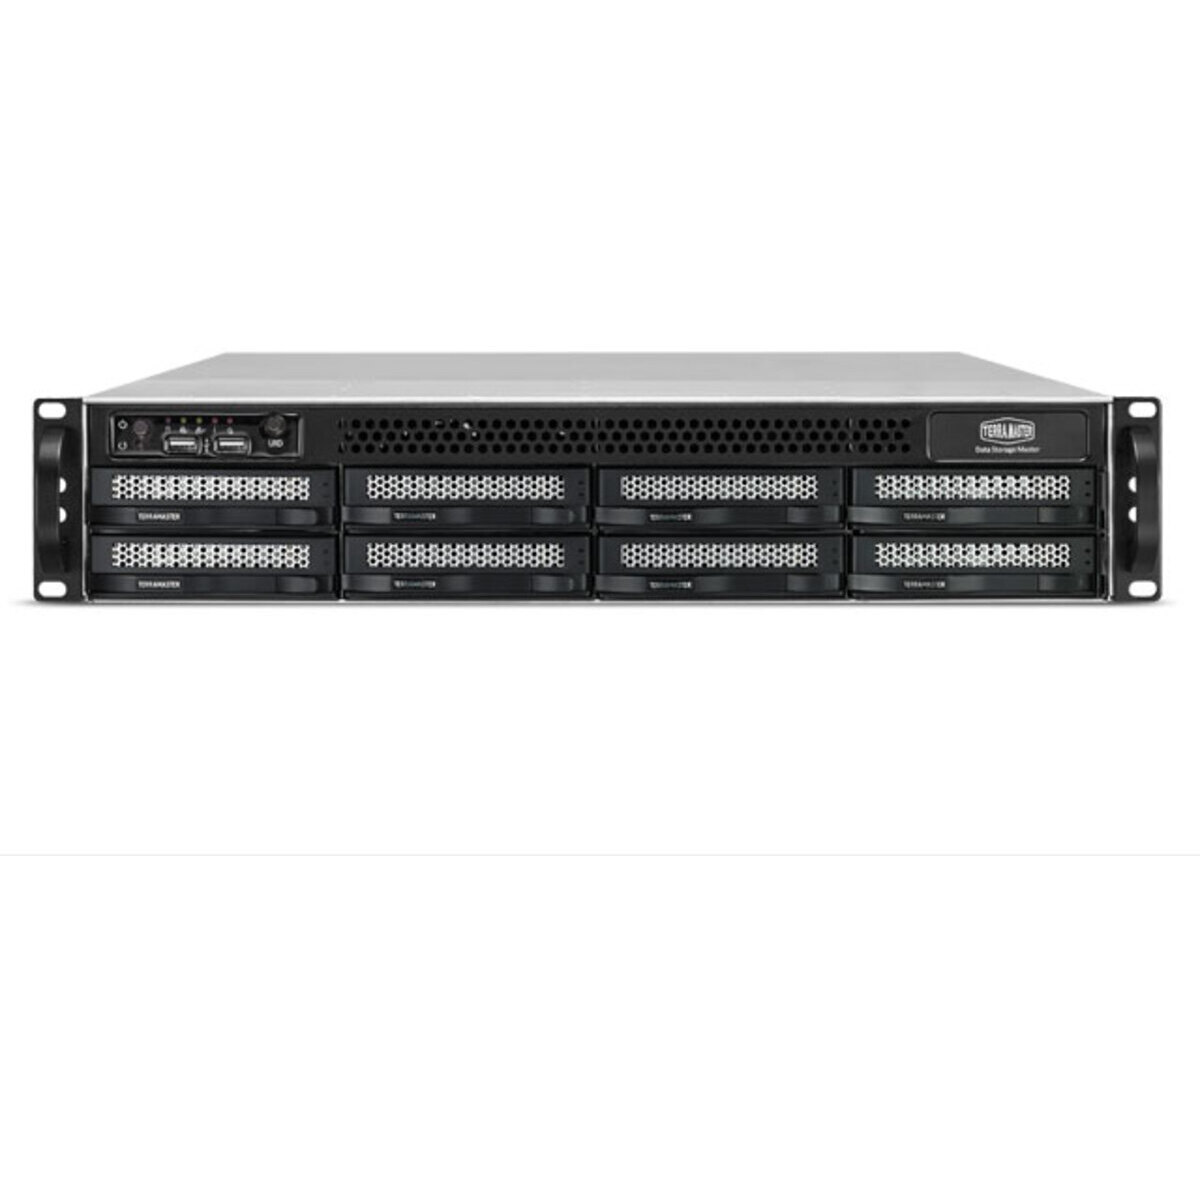 TerraMaster U8-522-9400 120tb 8-Bay RackMount Large Business / Enterprise NAS - Network Attached Storage Device 6x20tb Western Digital Red Pro WD201KFGX 3.5 7200rpm SATA 6Gb/s HDD NAS Class Drives Installed - Burn-In Tested U8-522-9400